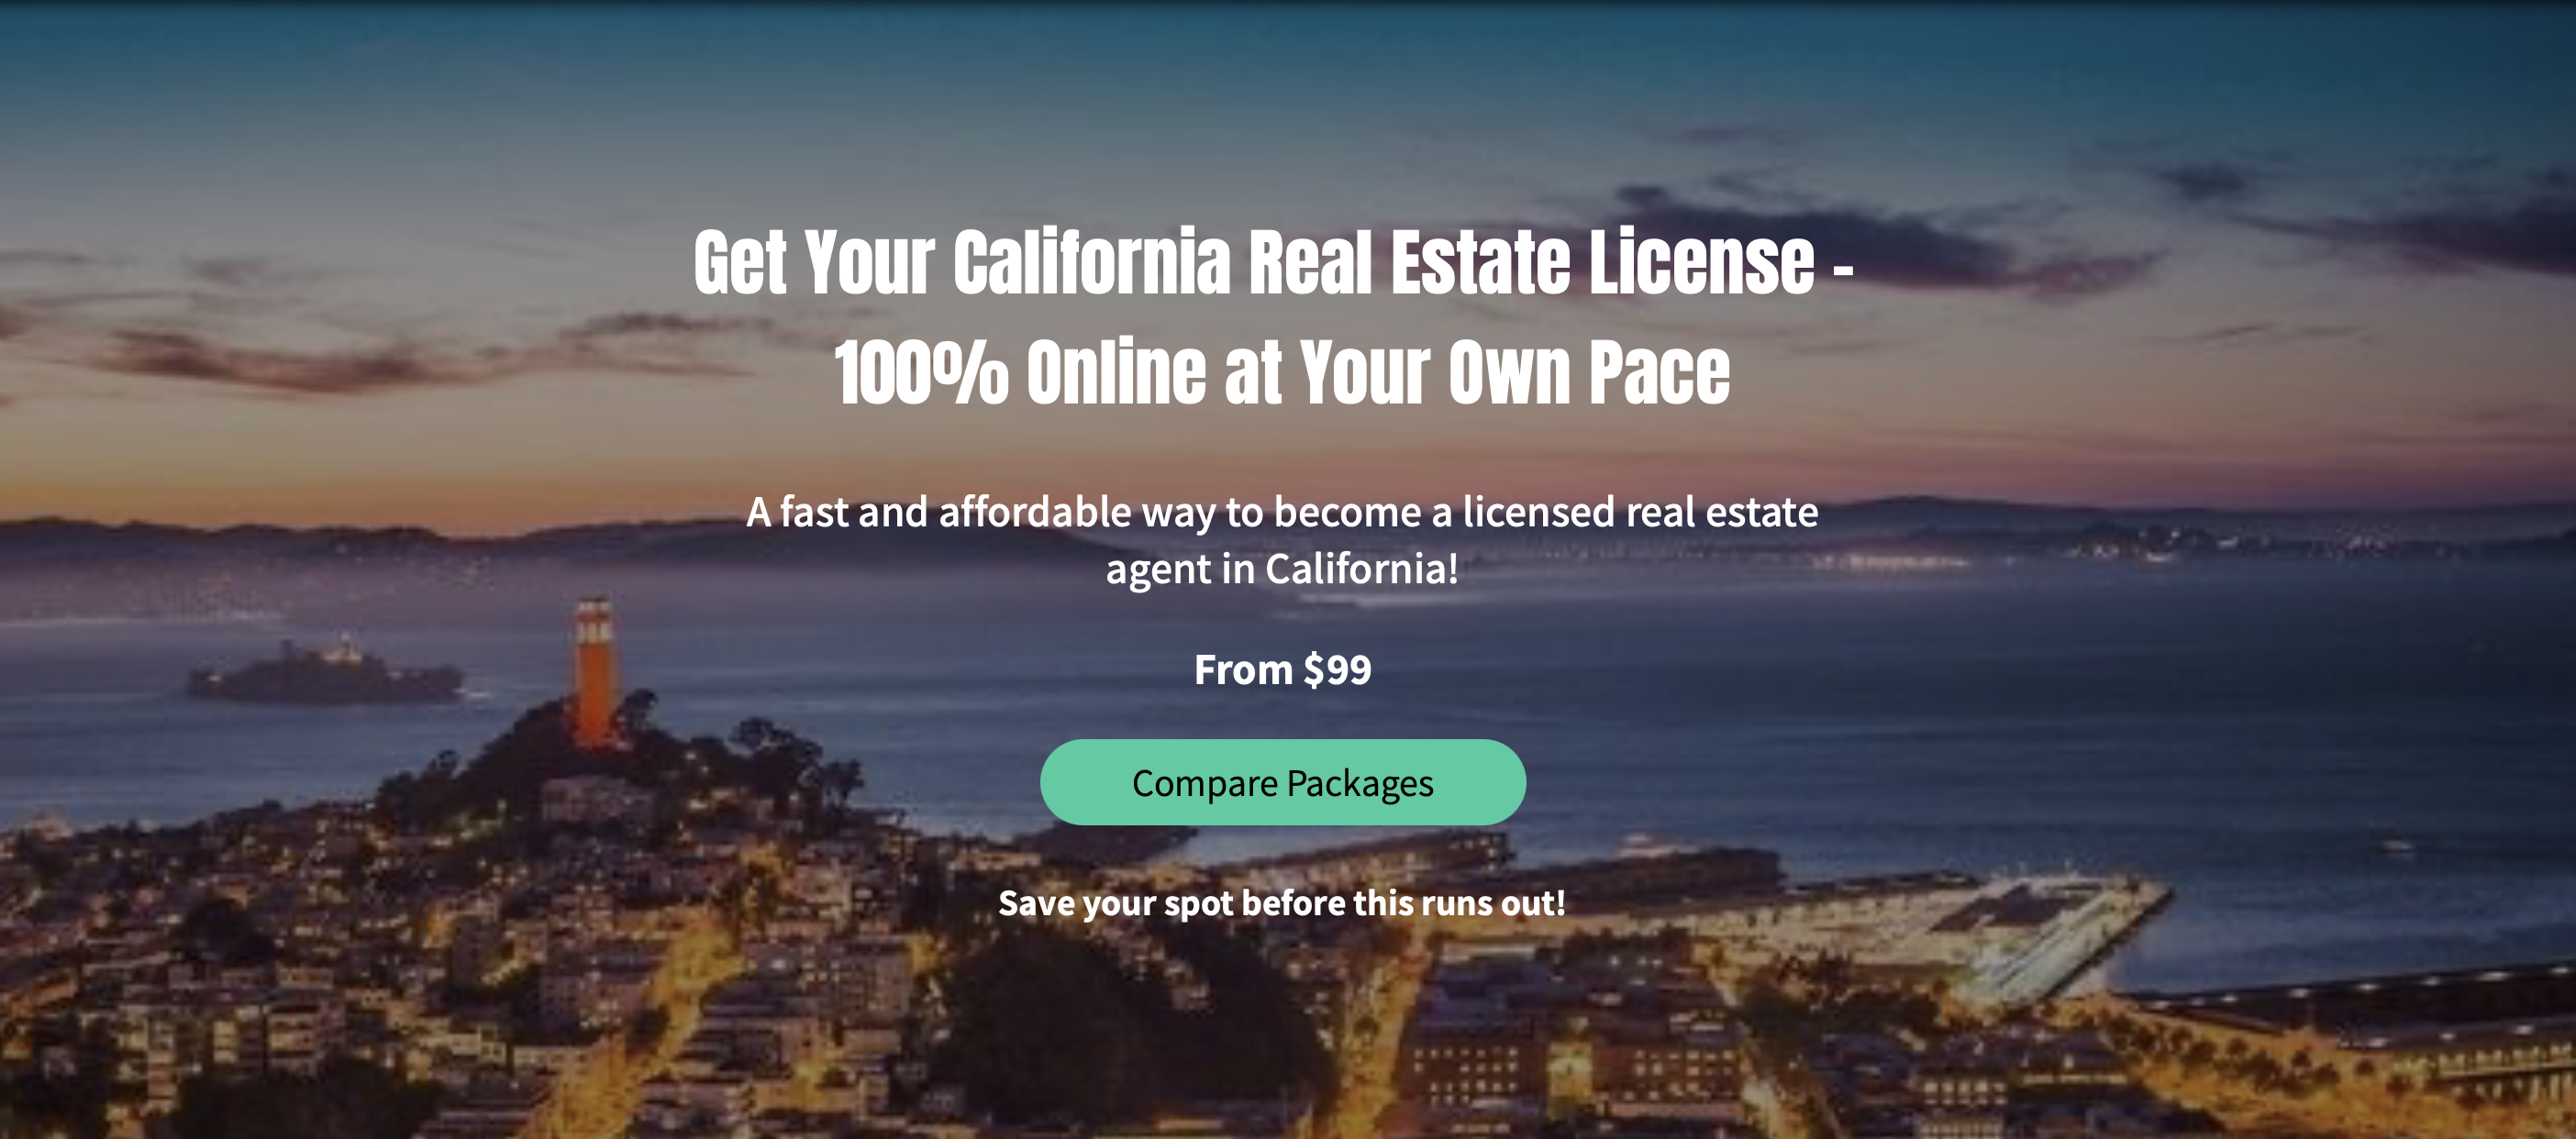 Advertisement for the California Real Estate License Course from Real EstateU